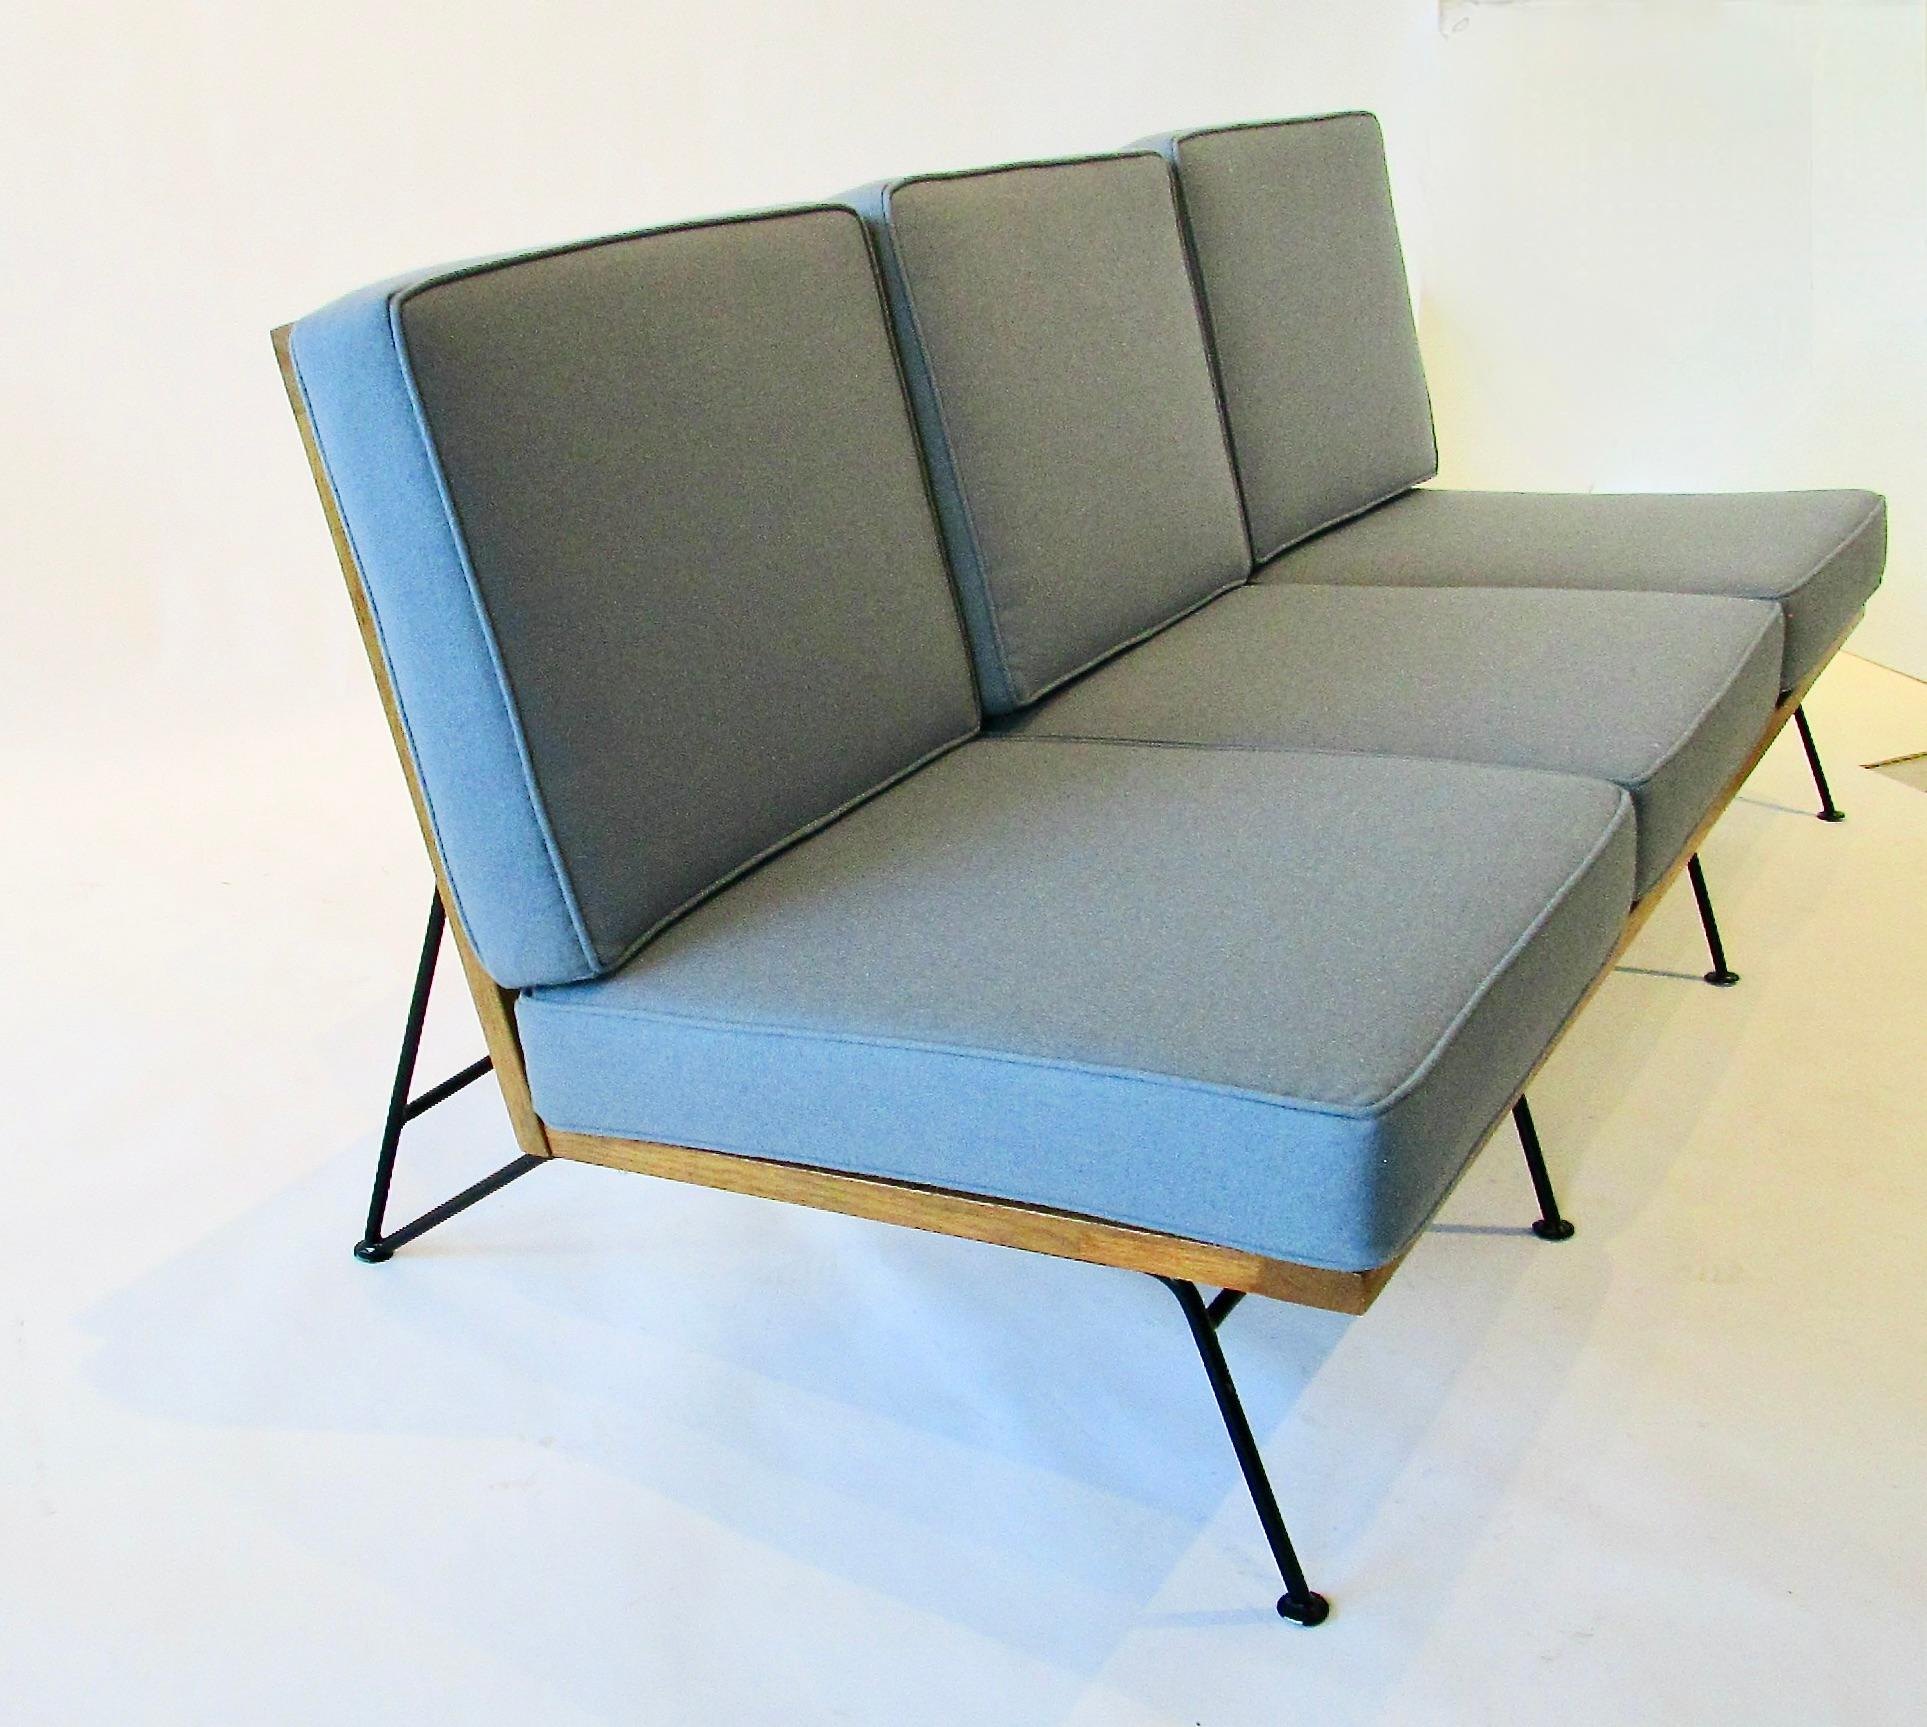 Saarinen Swanson Ficks Reed Wrought Iron with Wood Frame Couch In Good Condition For Sale In Ferndale, MI